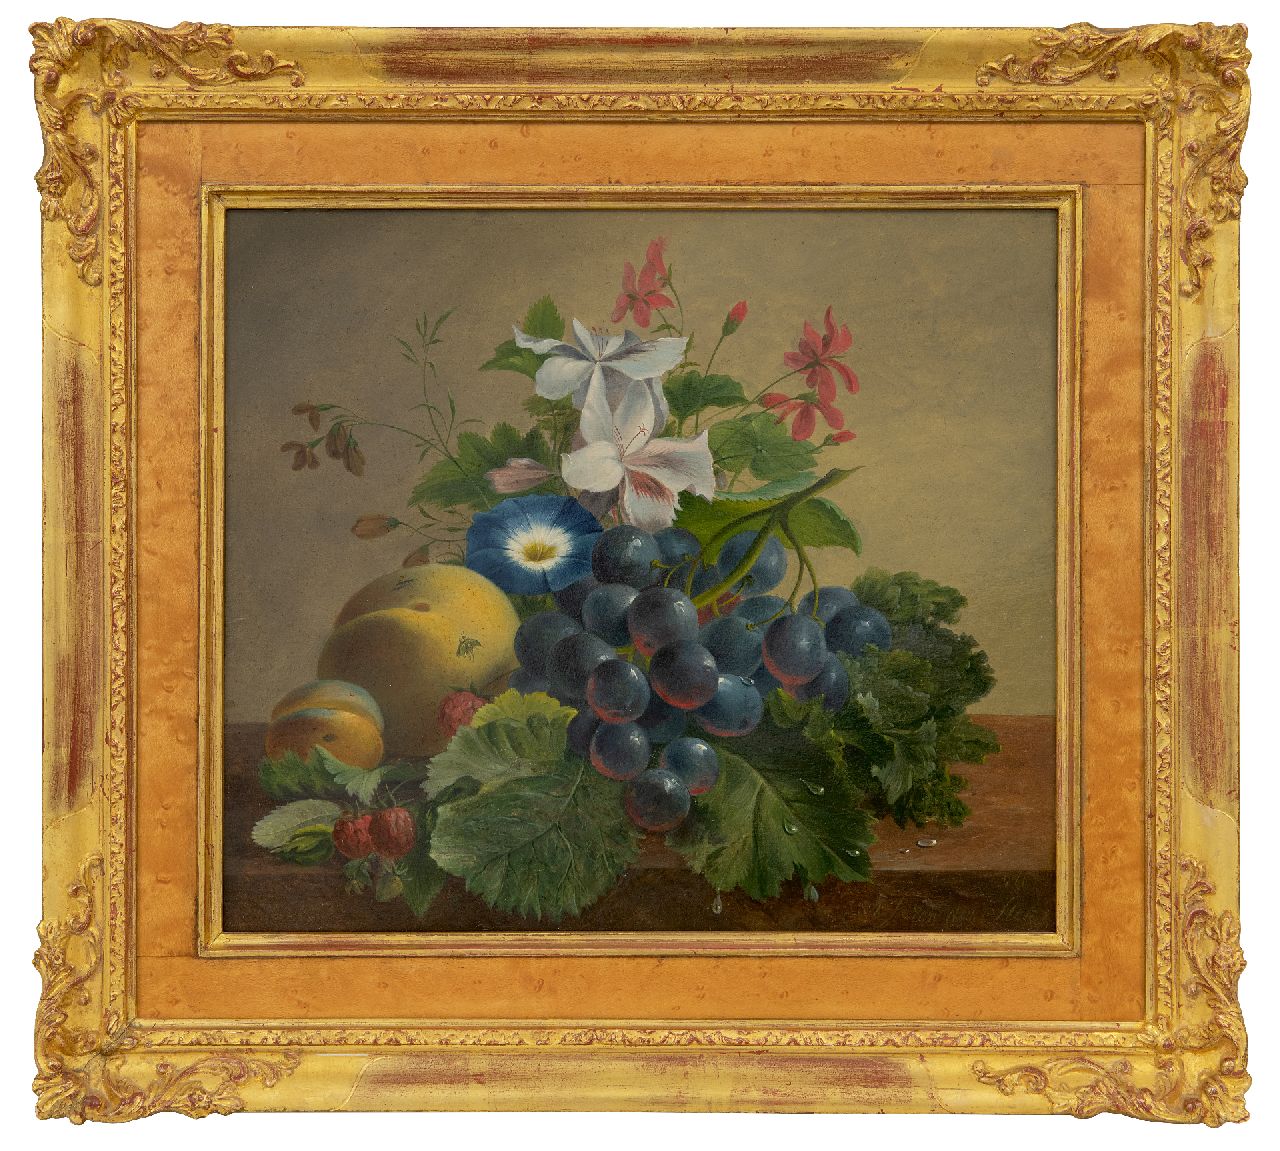 Stok J. van der | Jacoba van der Stok, Still life with flowers and fruit on a ledge, oil on panel 26.2 x 30.1 cm, signed l.r. and dated 1840